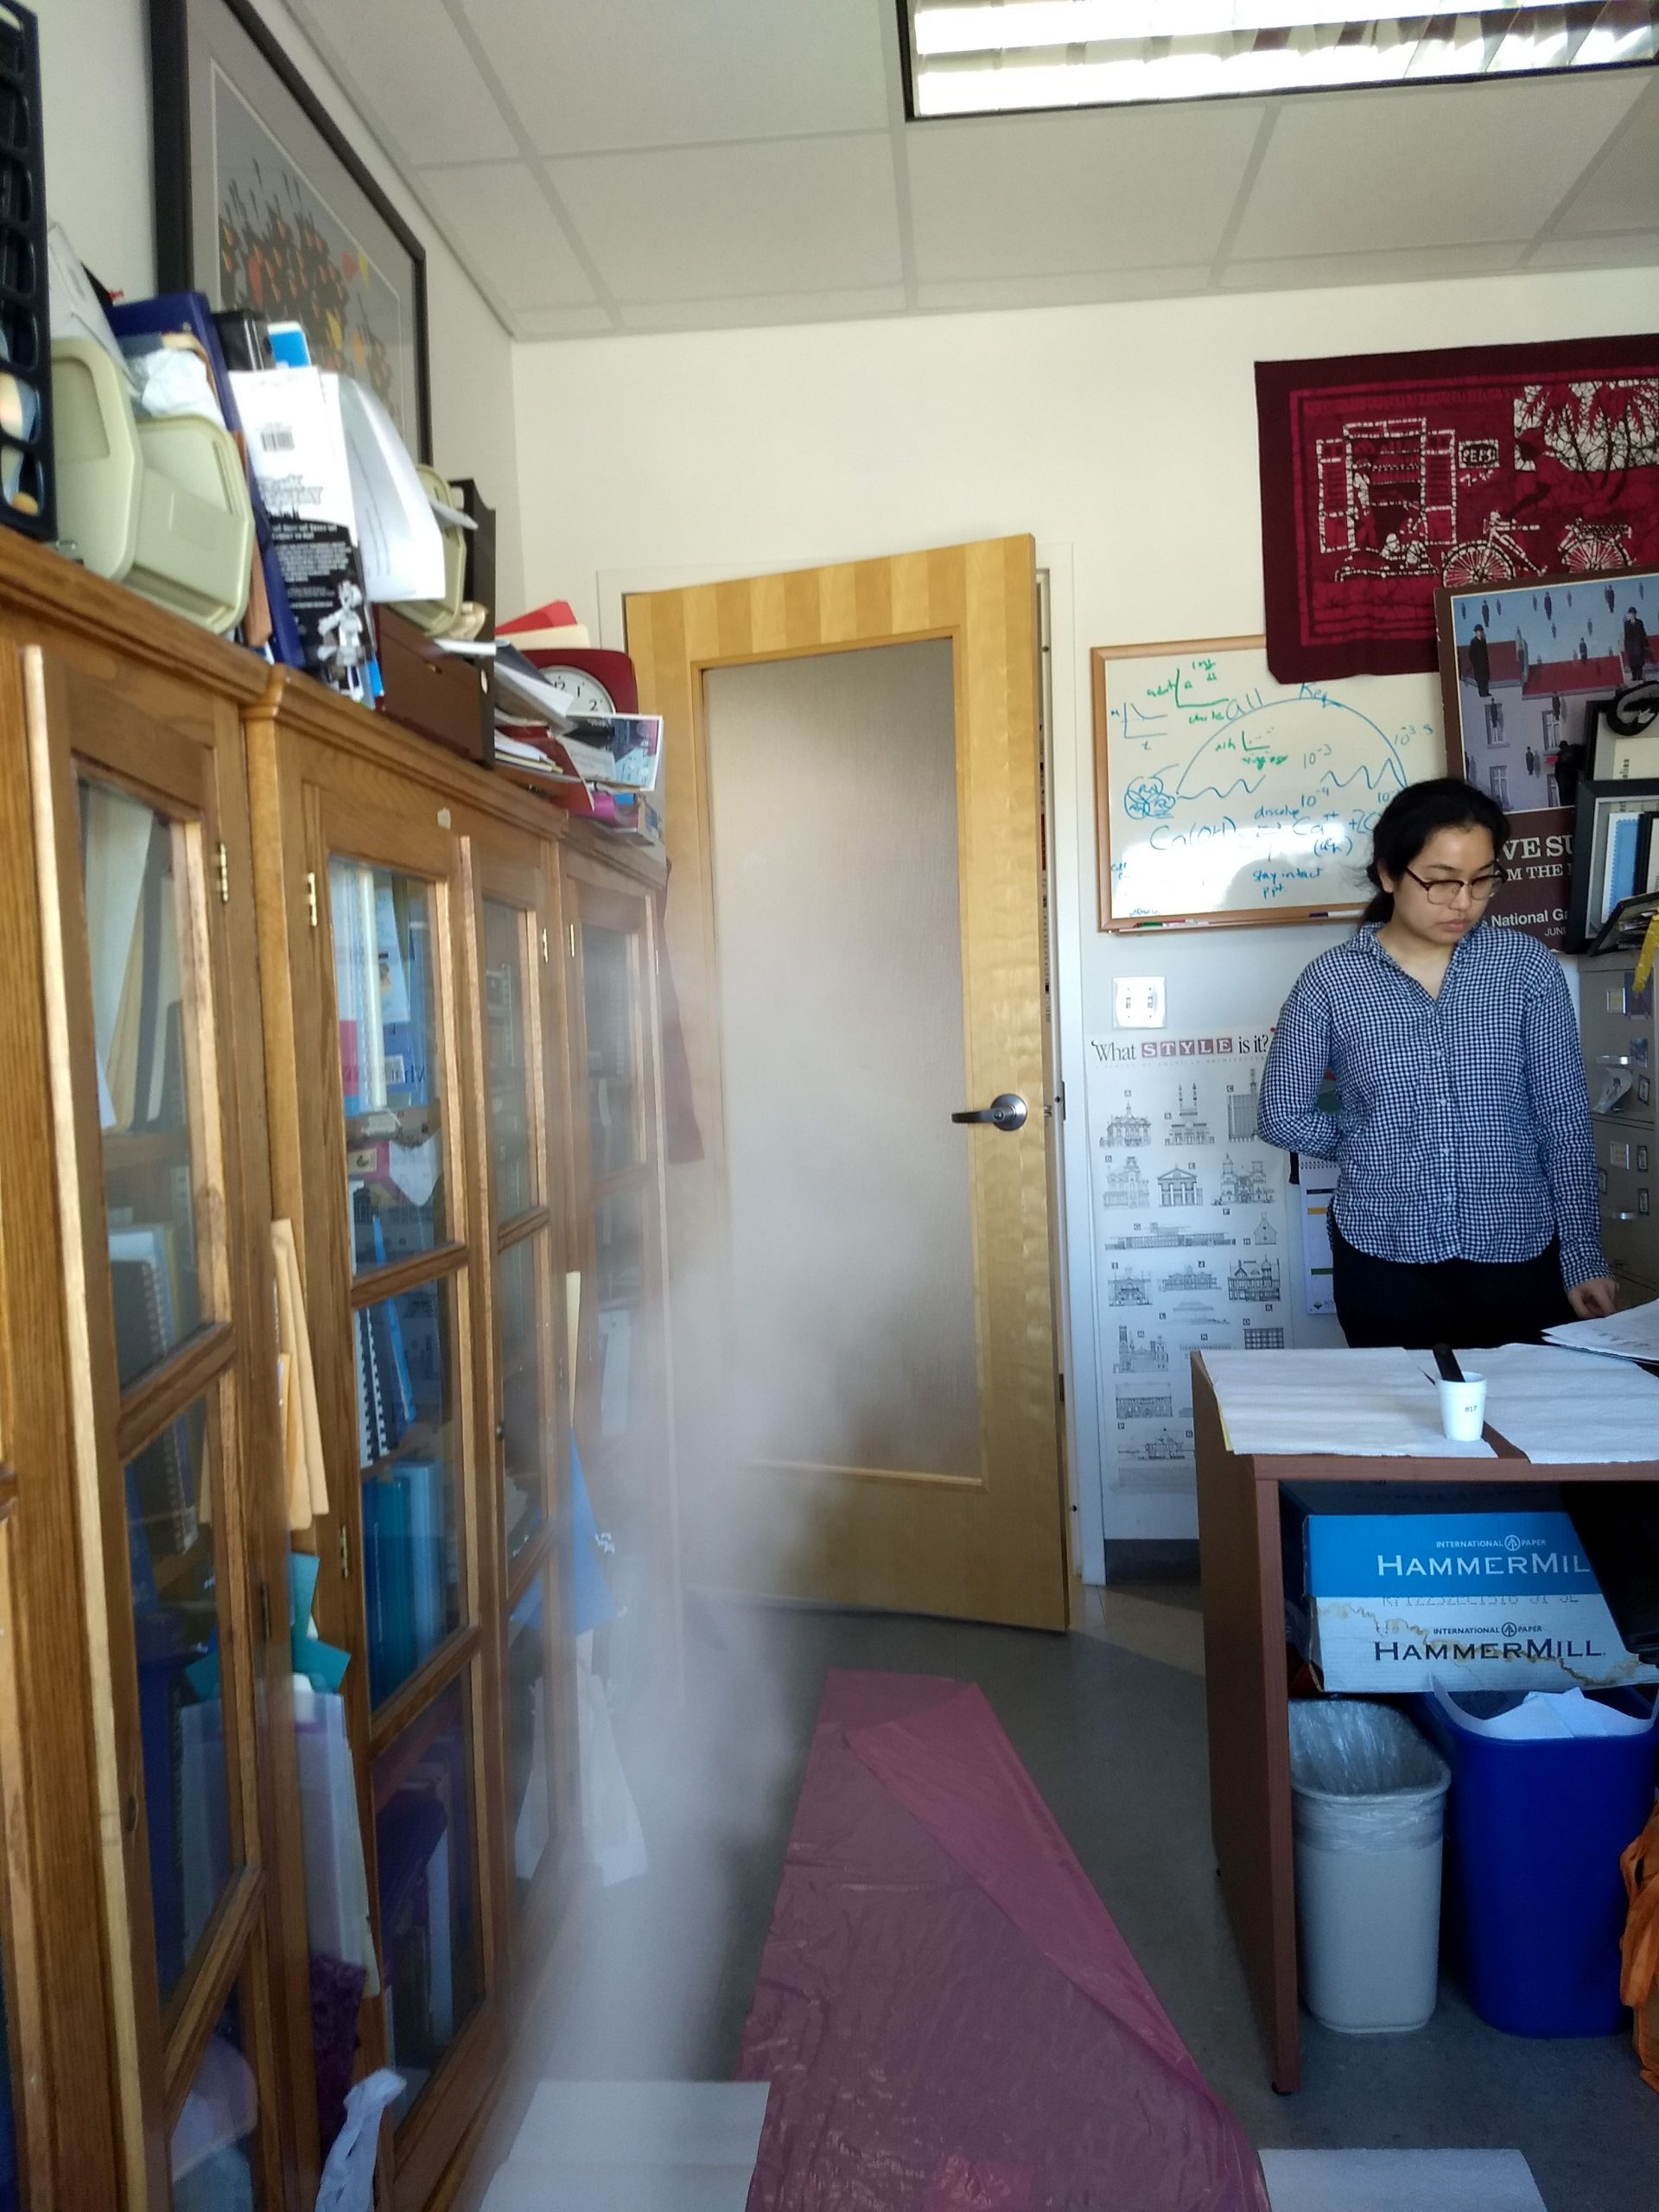 Wenchuo Yao tests the quality of the air in a room with a running humidifier